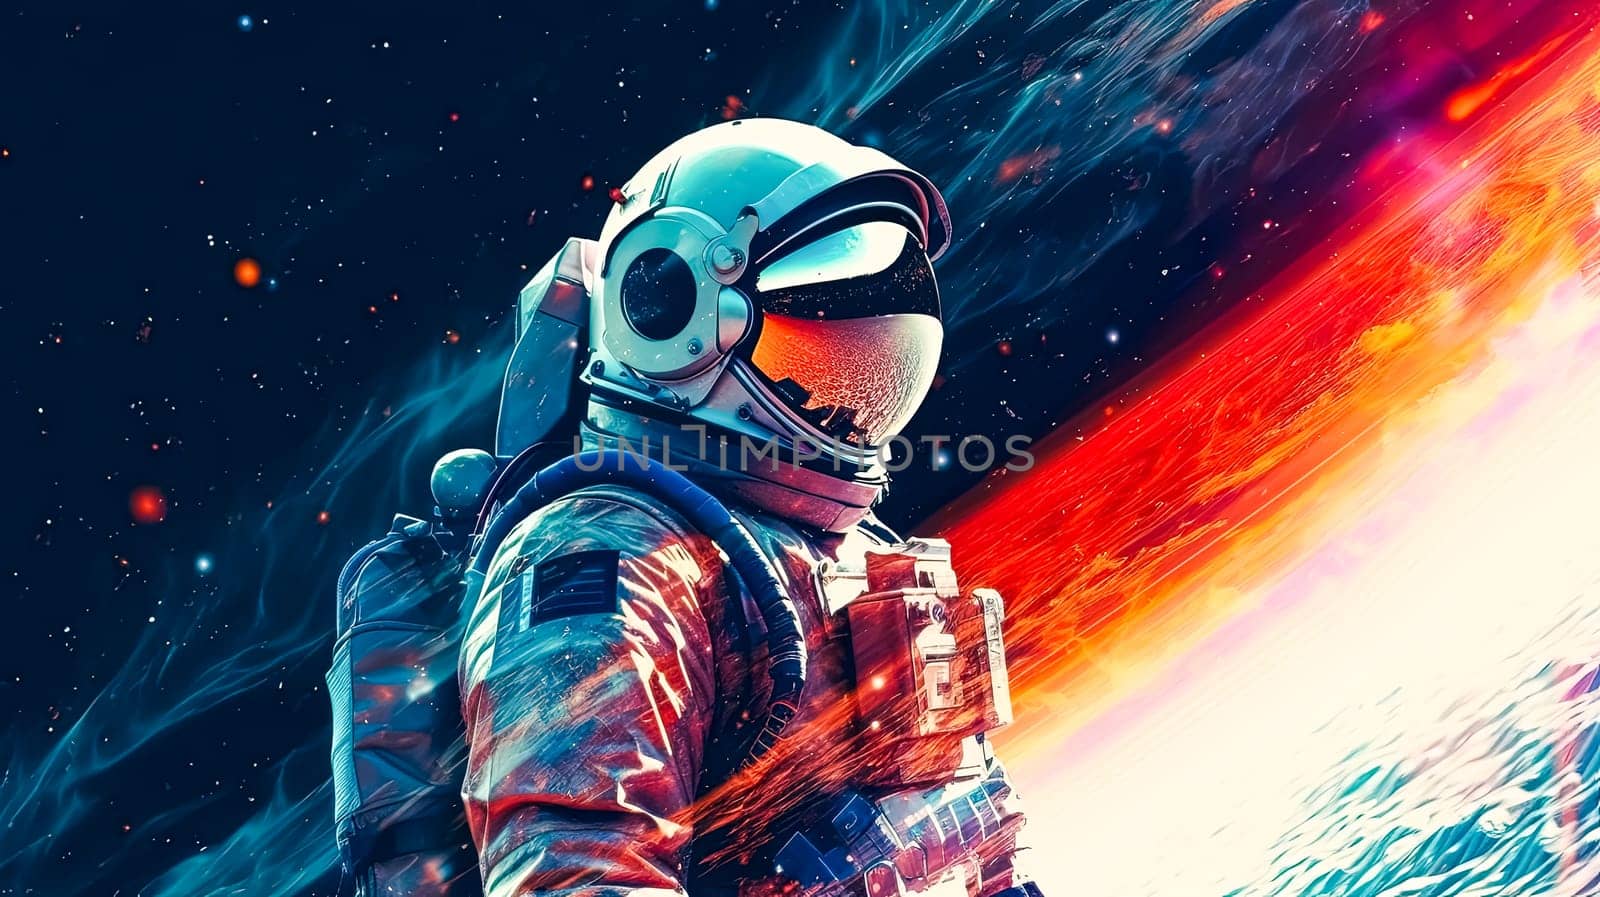 Exploring the unknown, an astronaut in a sleek spacesuit confidently strides through otherworldly terrain, with the mesmerizing expanse of space serving as his canvas.